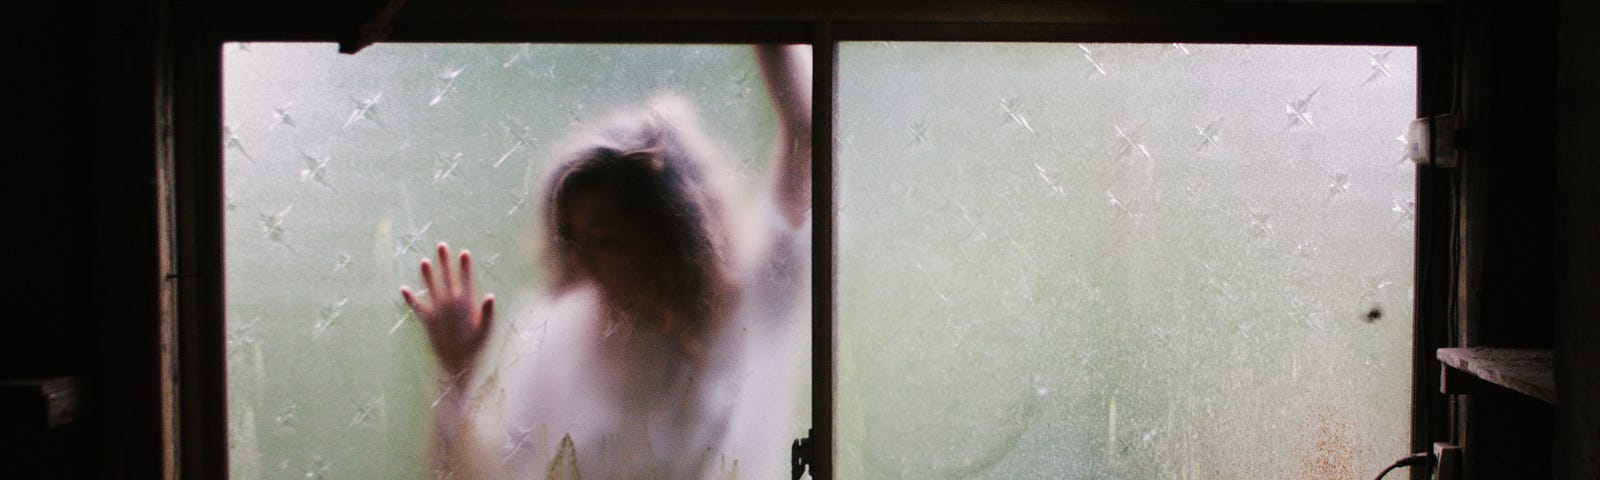 Blurred image of a woman with her hands placed against a window. Spooky, creepy, trapped feeling.